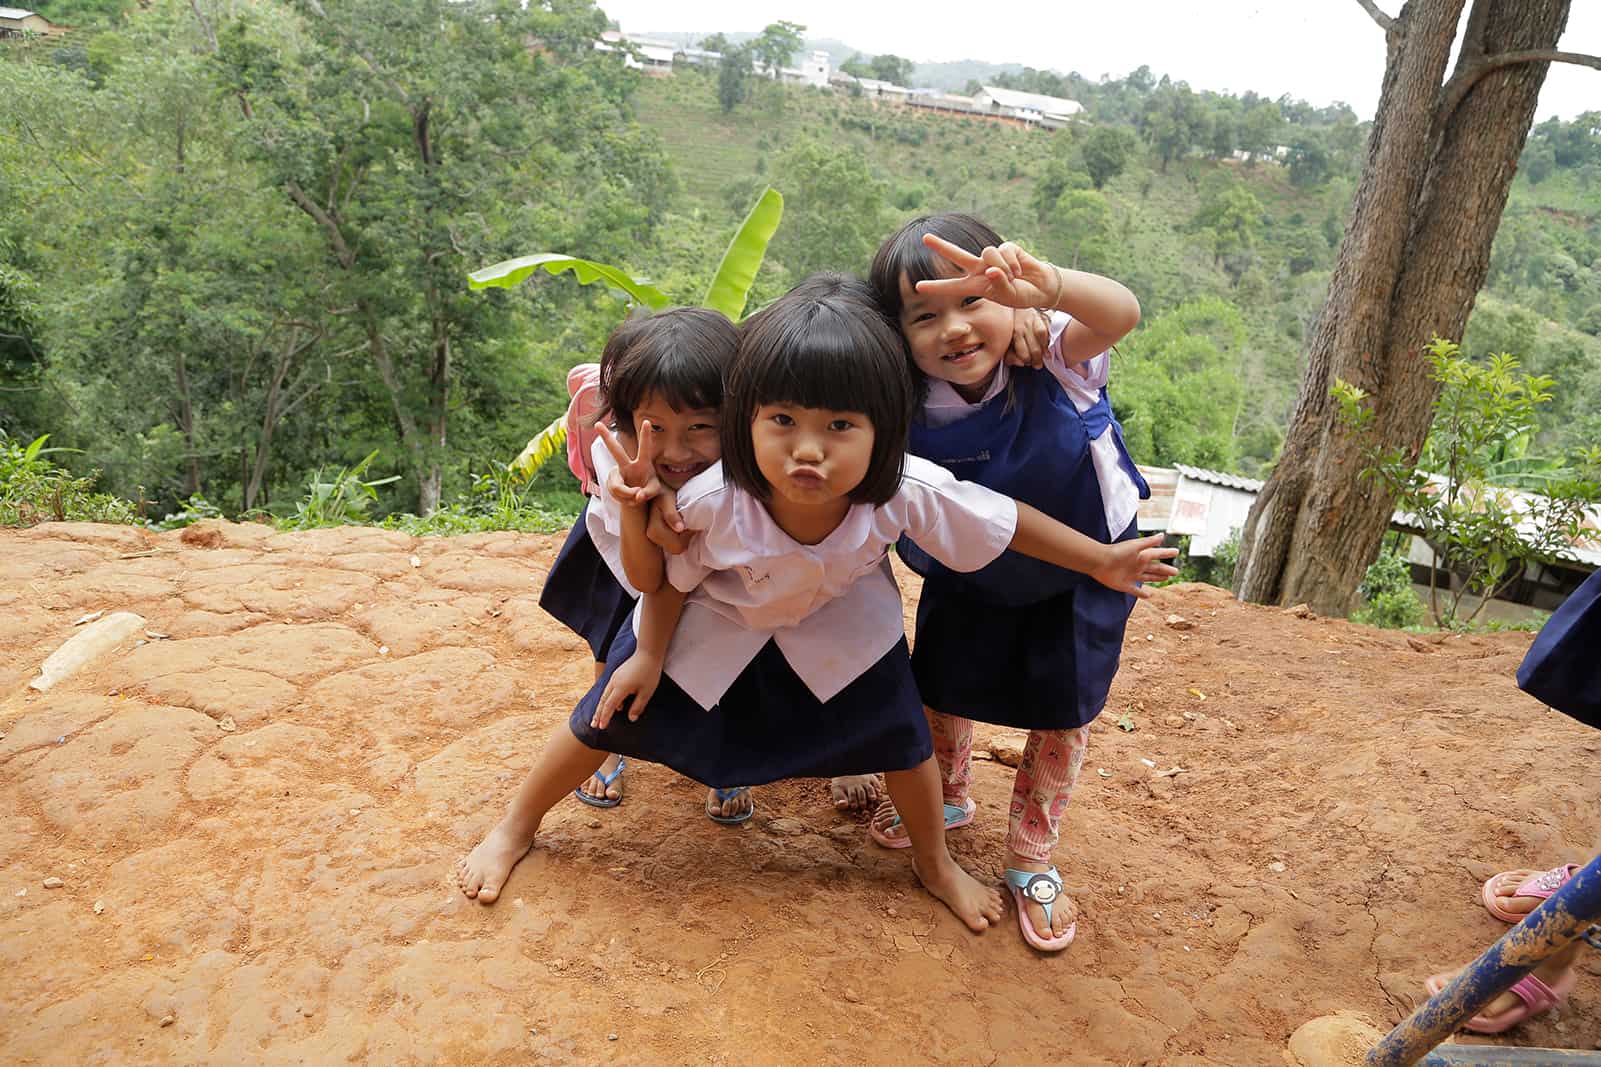 Grils in Thailand showing the peace sign